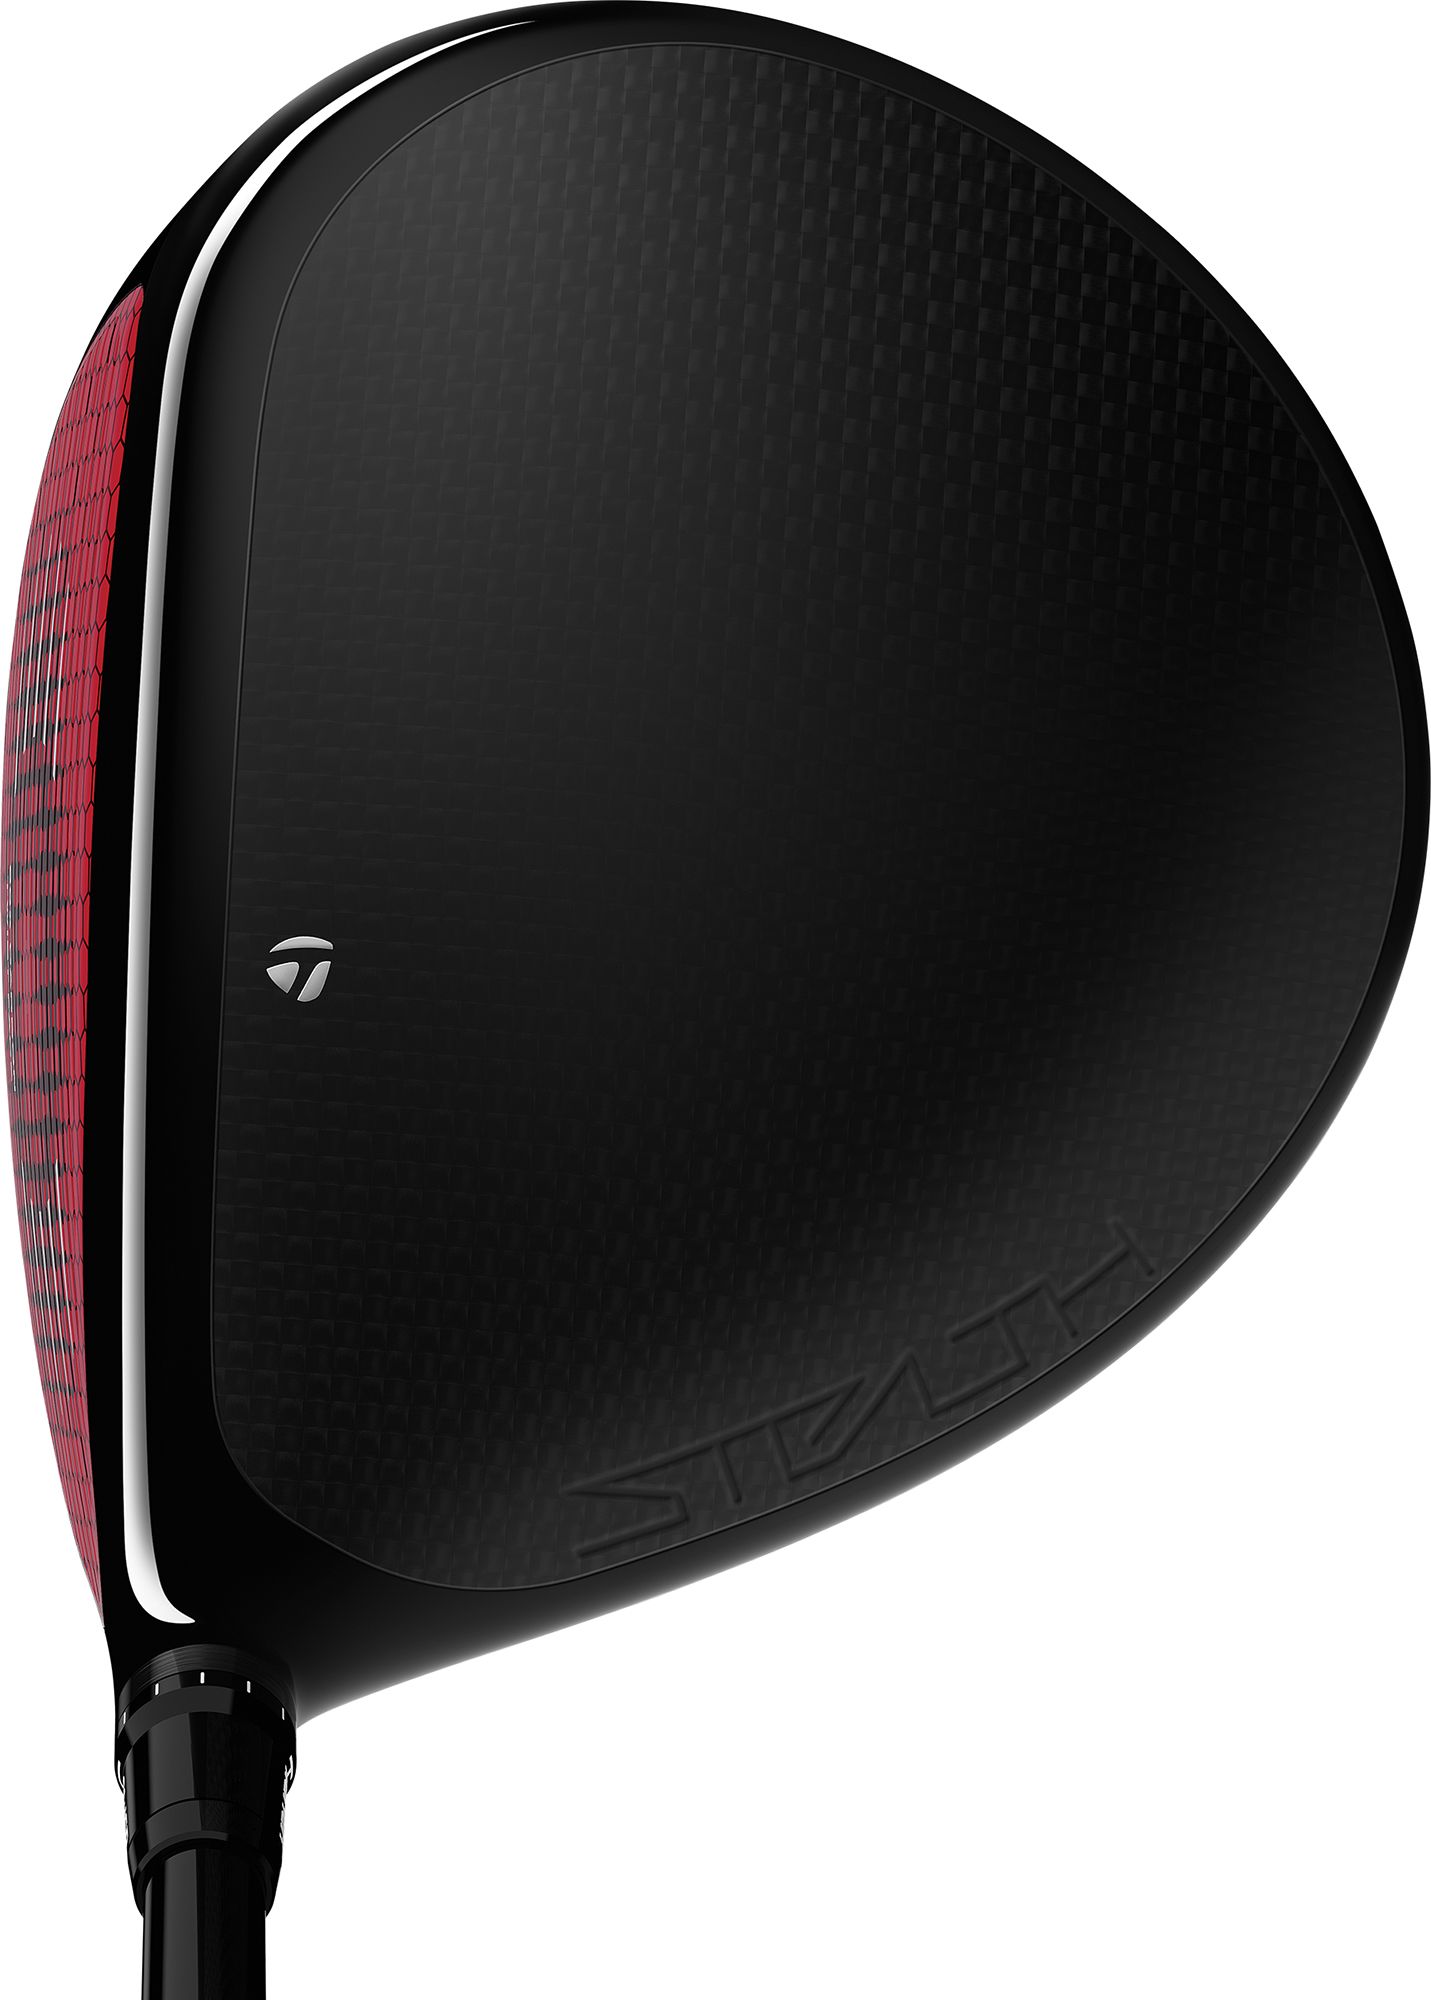 TaylorMade 2022 Stealth HD Driver